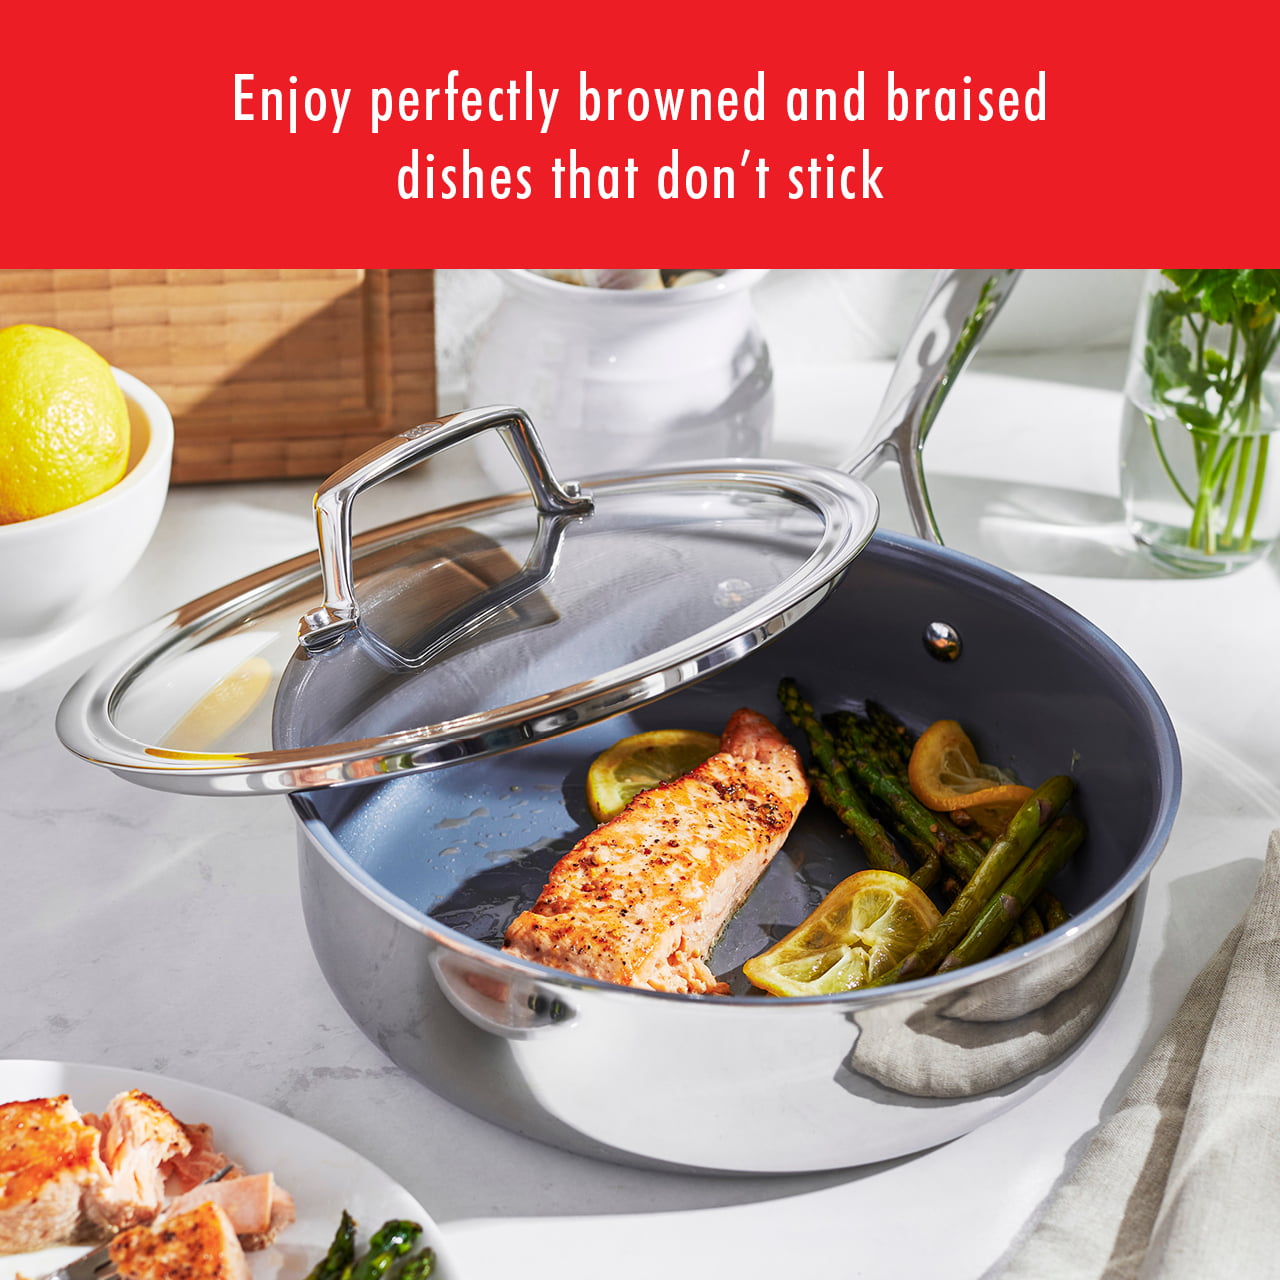 ZWILLING Energy Plus 8-inch Stainless Steel Ceramic Nonstick Fry Pan, 8-inch  - Foods Co.